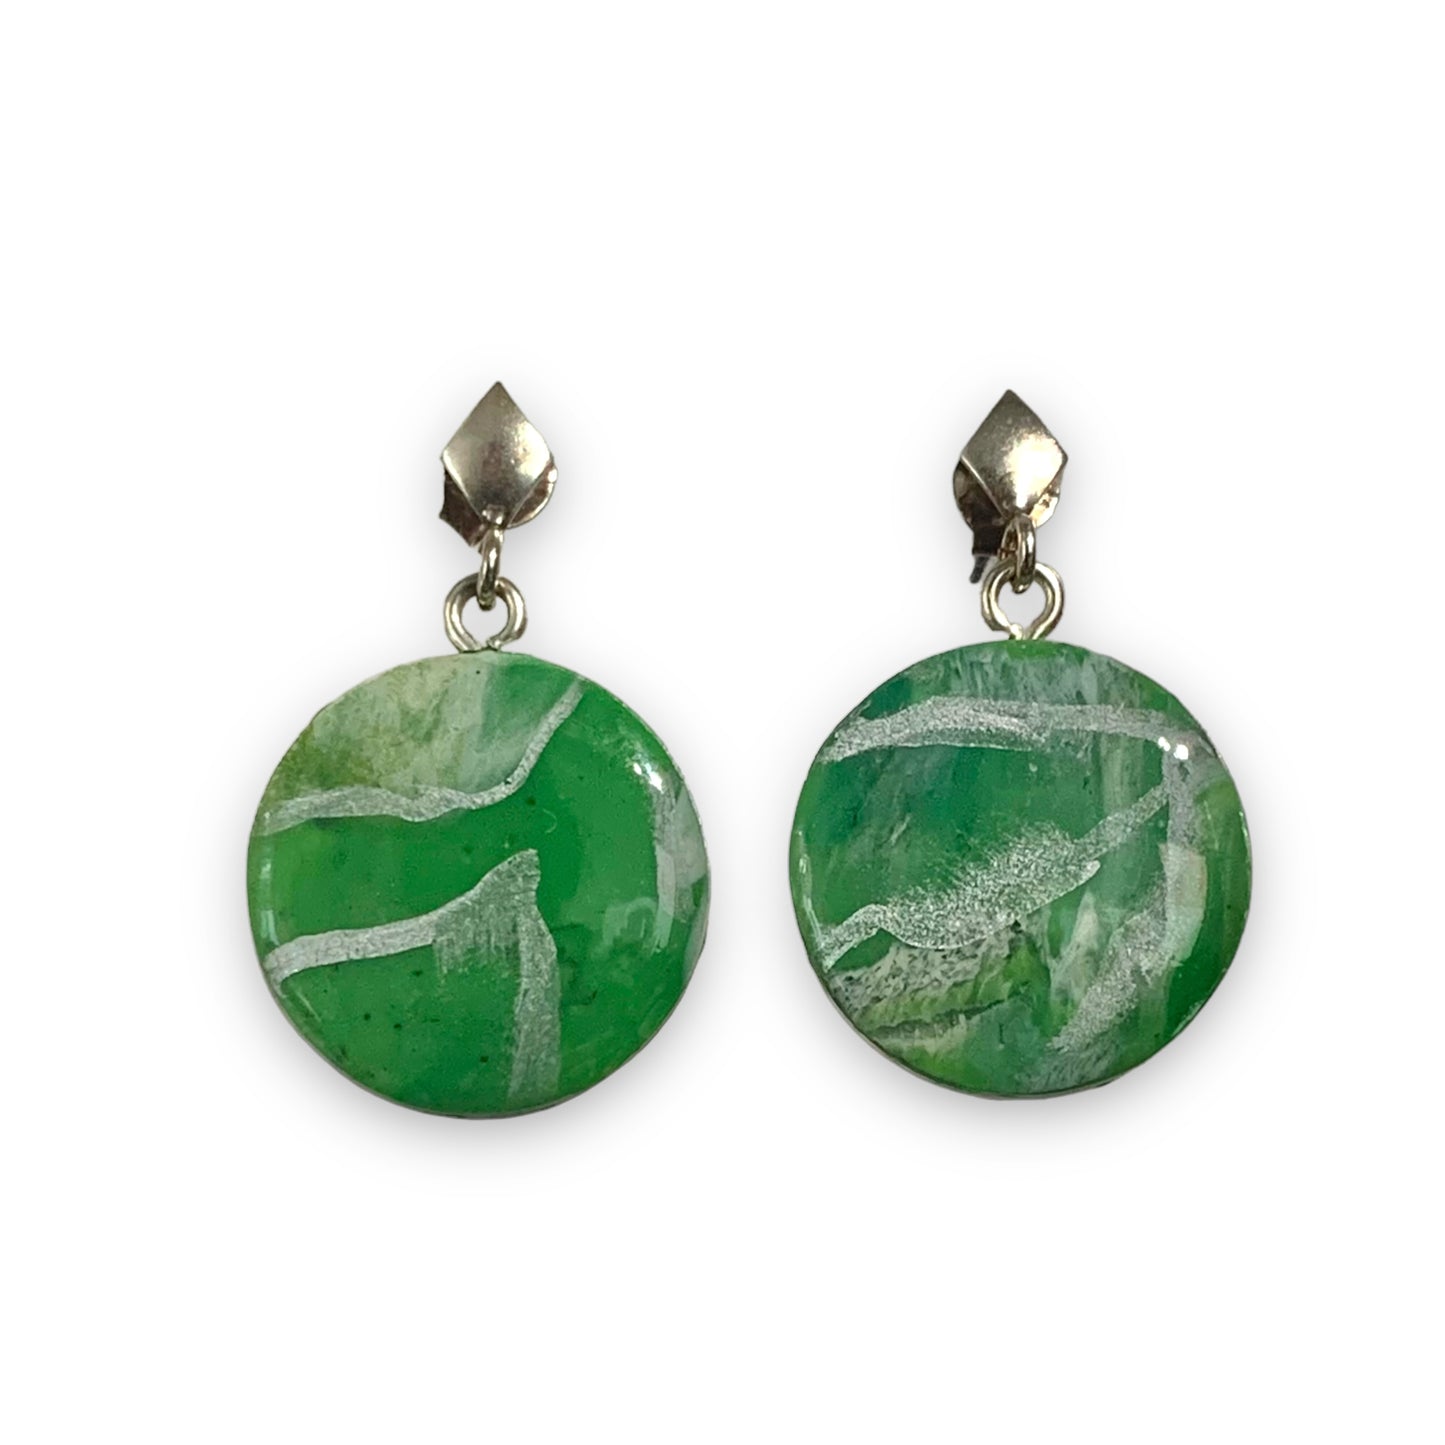 Sustainable Earrings Handmade from recycled bottle tops green circle studs handmade jewellery eco gift 